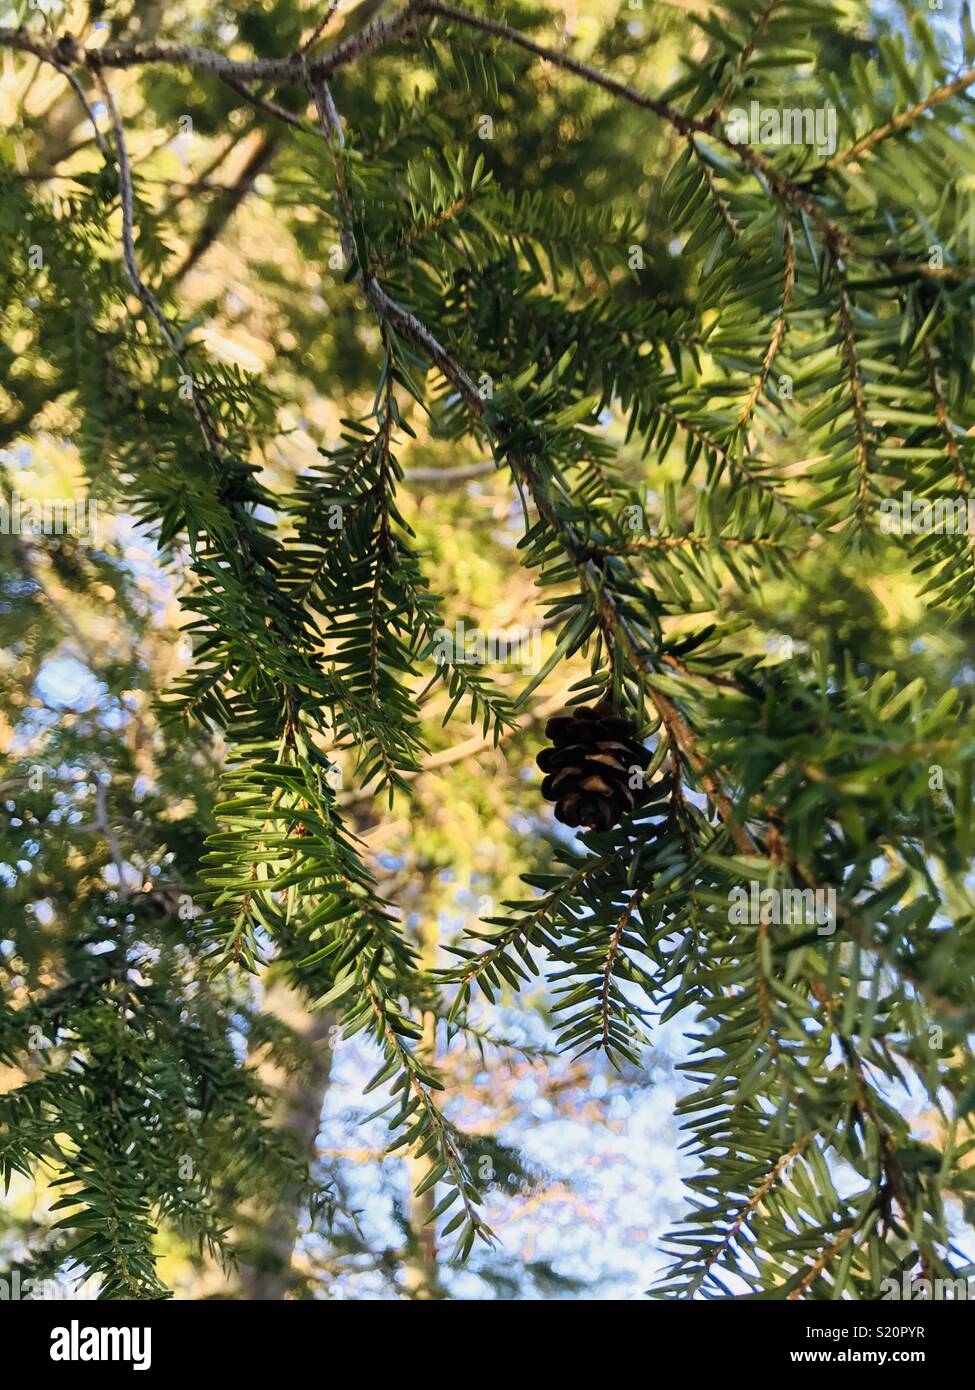 Small pinecone on a branch by itself Stock Photo